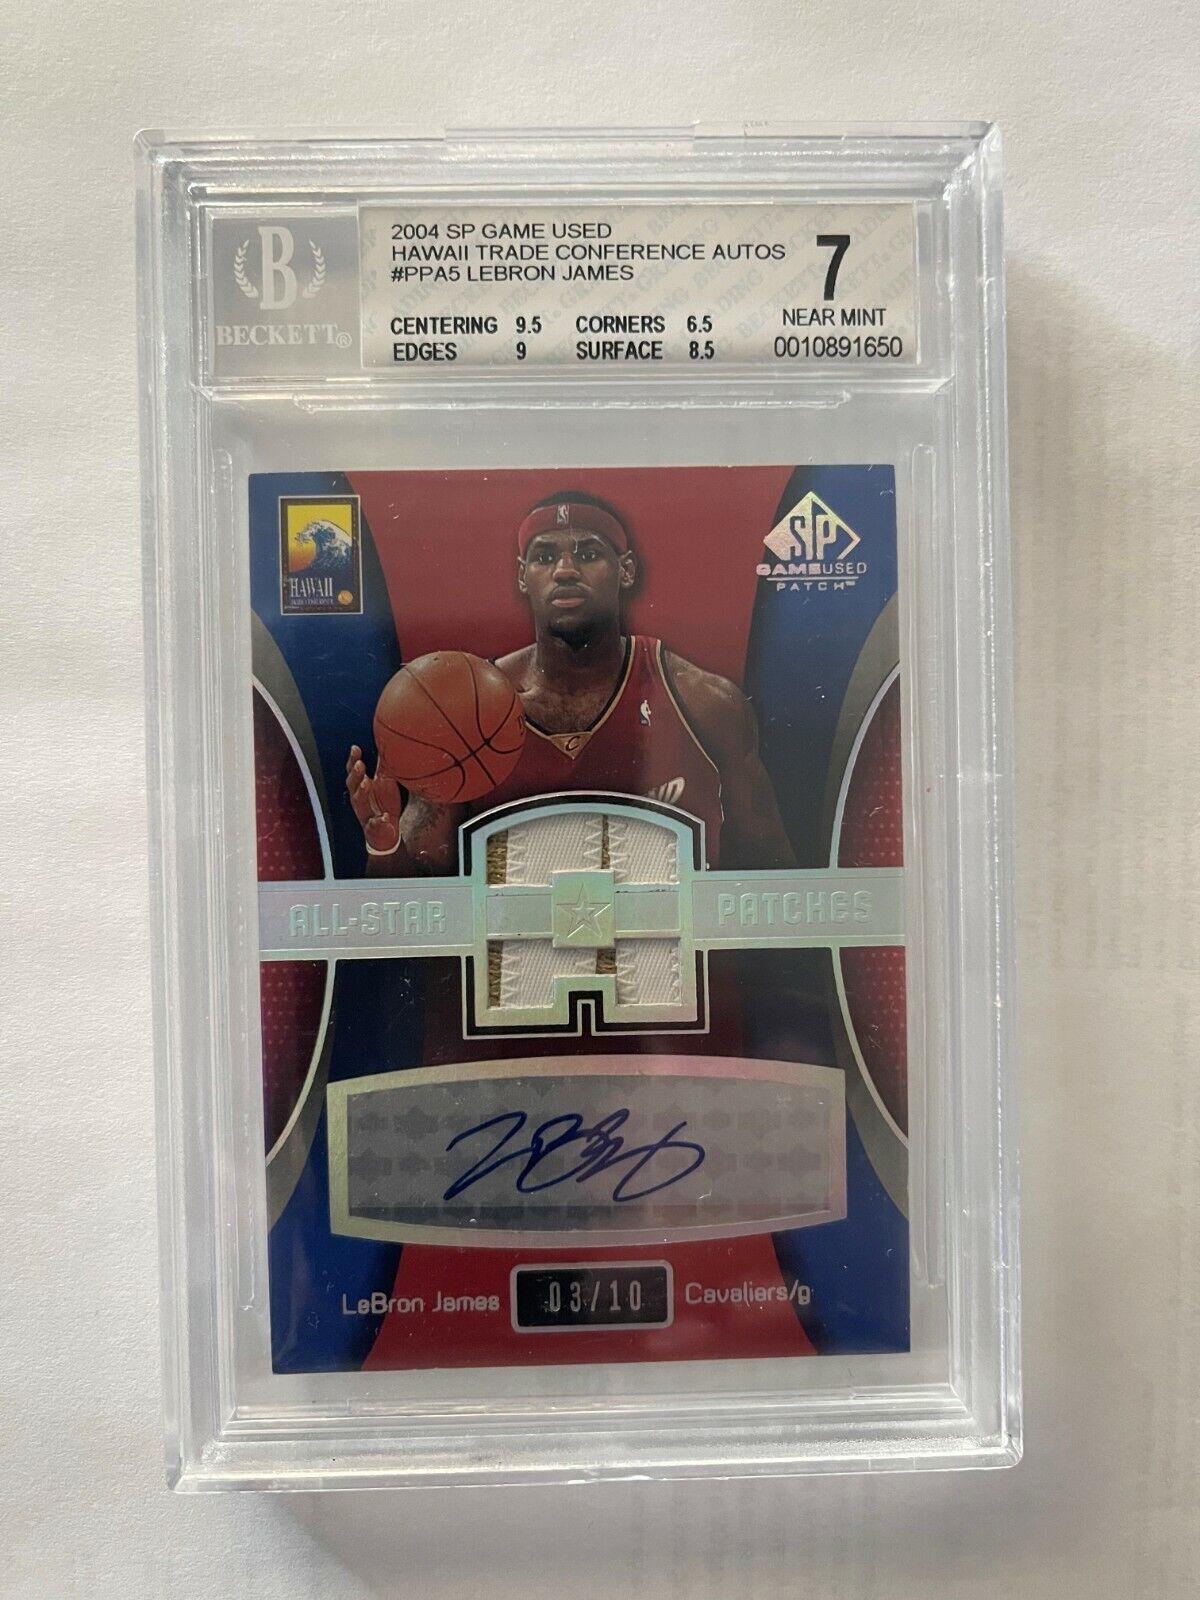 LEBRON JAMES 2004 SP GAME USED PATCH AUTO UD #3 AND #4 OF 10 BGS AUTHENTICATED Без бренда - фотография #3